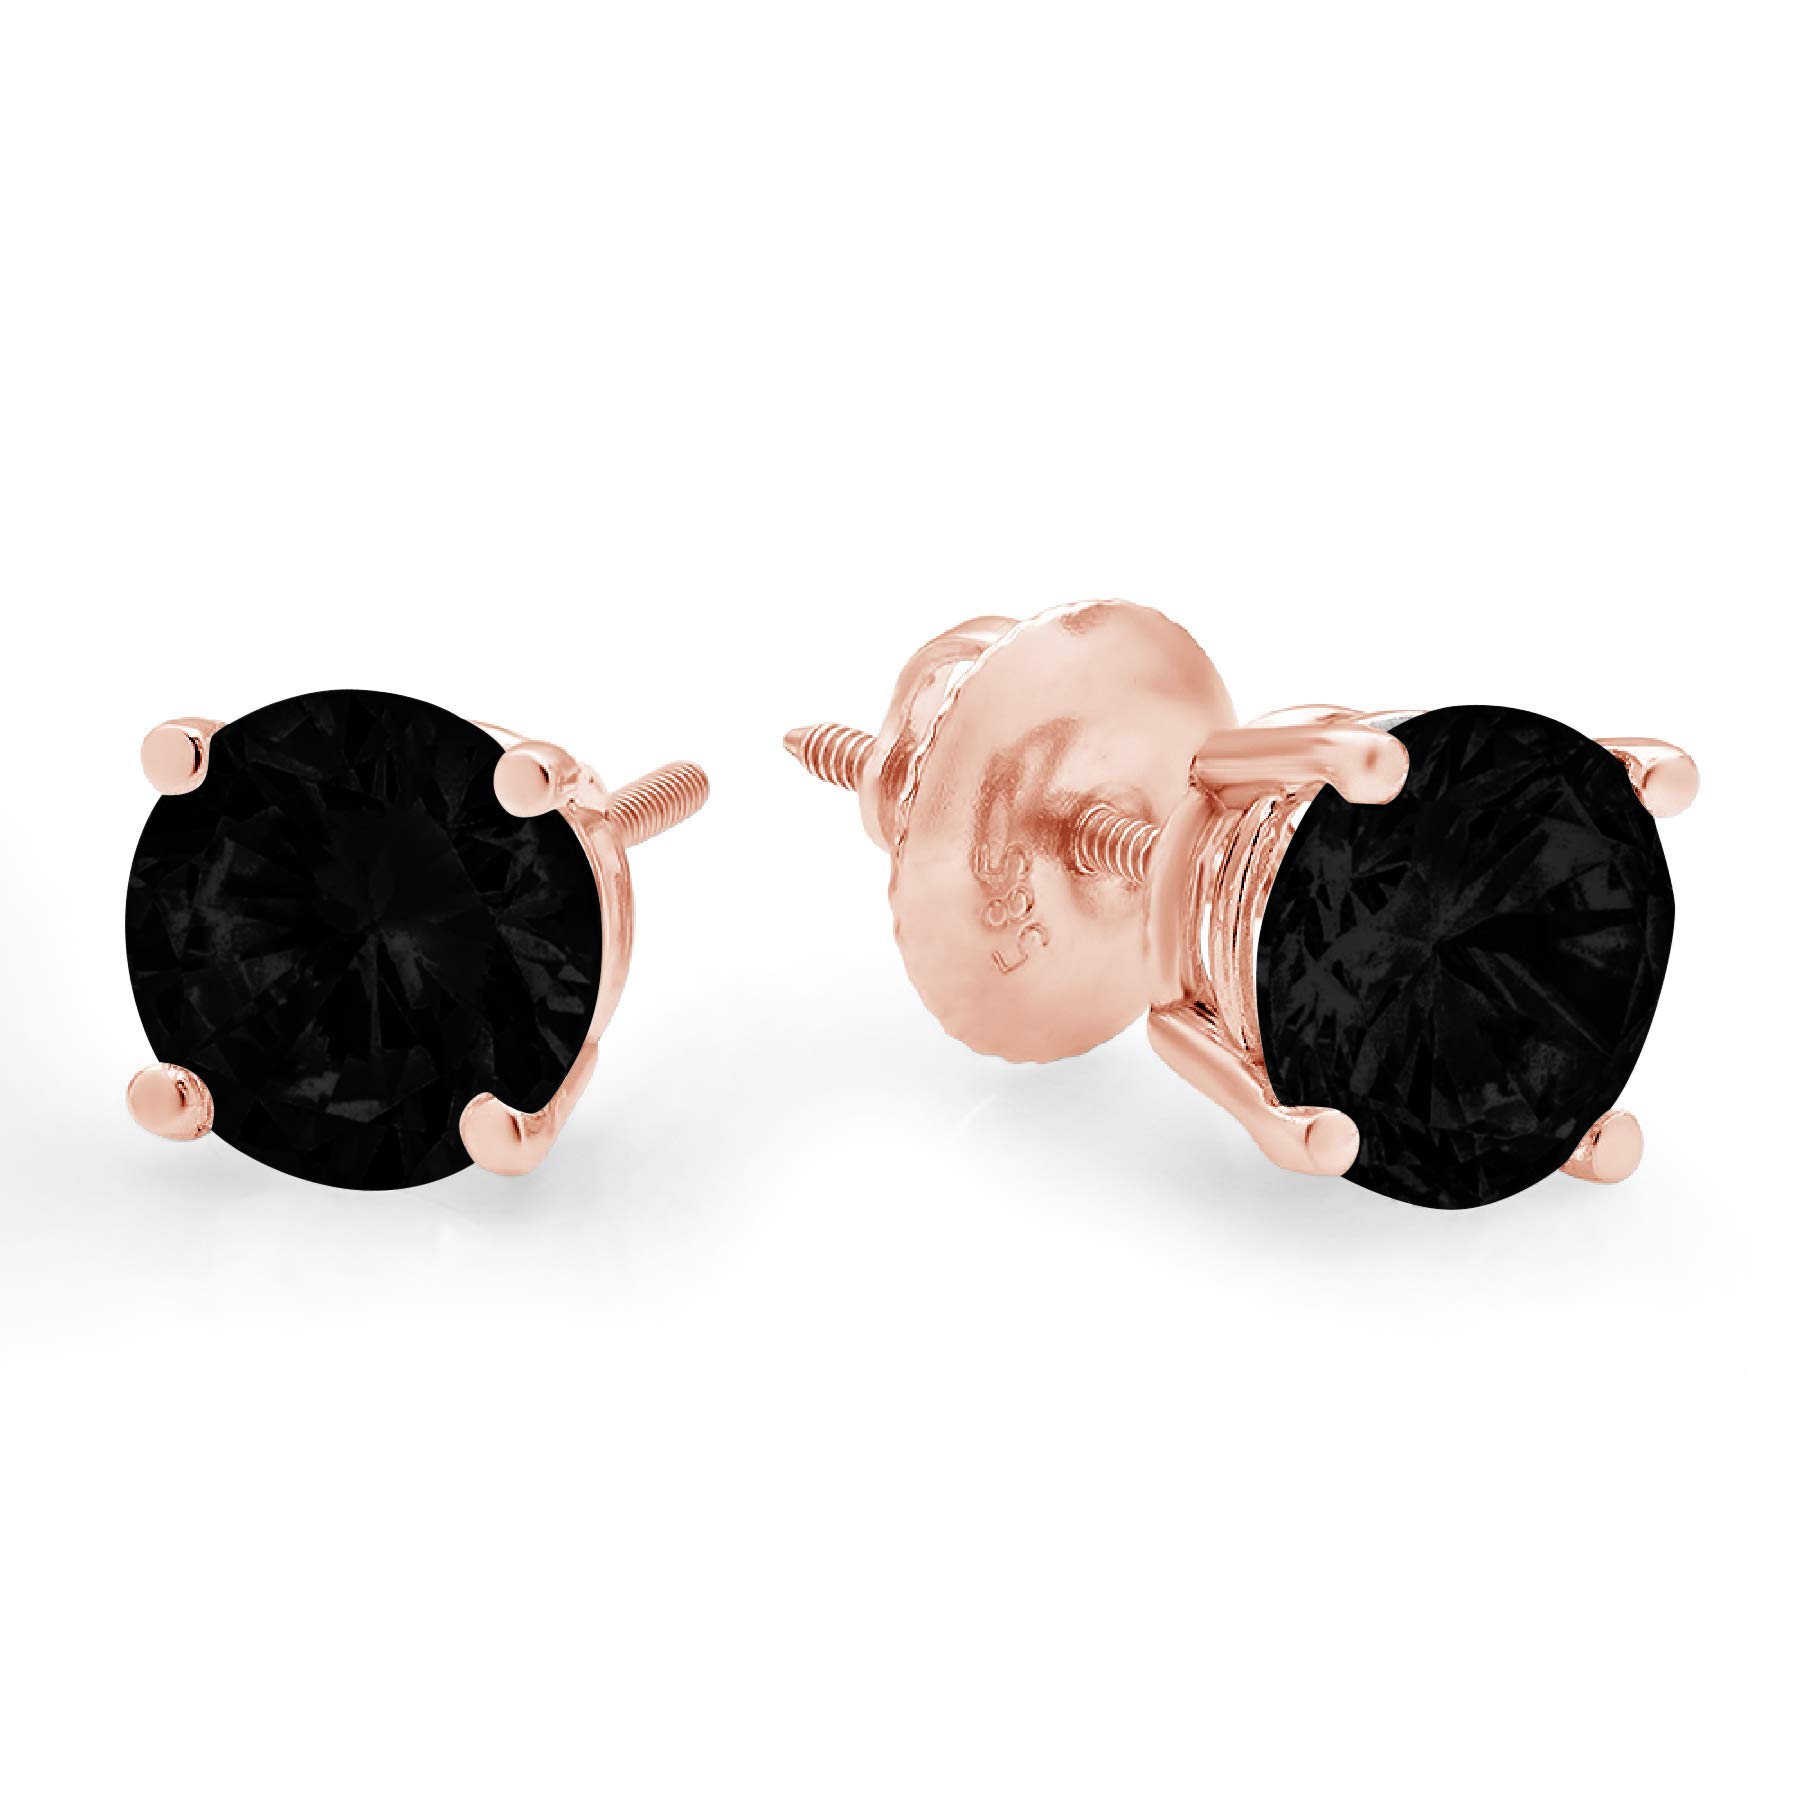 Clara Pucci 1.6 ct Brilliant Round Cut Solitaire VVS1 Flawless Natural Black Onyx Gemstone Pair of Stud Earrings Solid 18K Rose Gold Screw Back